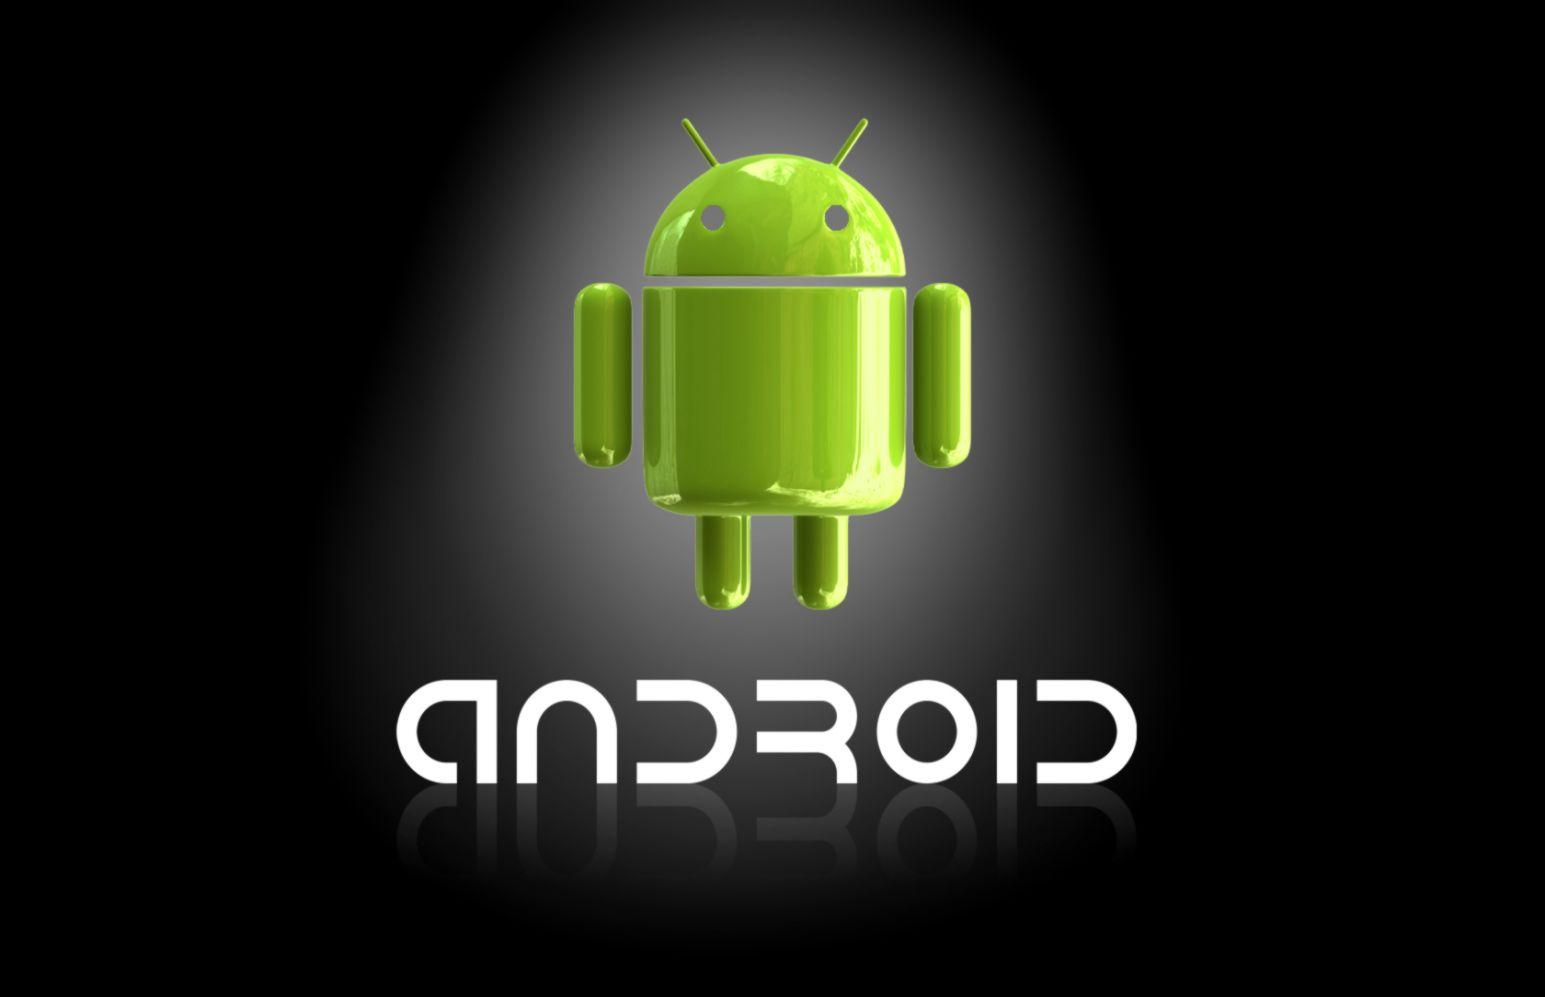 Android Kitkat Green Red Yellow Robot HD Wallpaper. Wallpaper Just